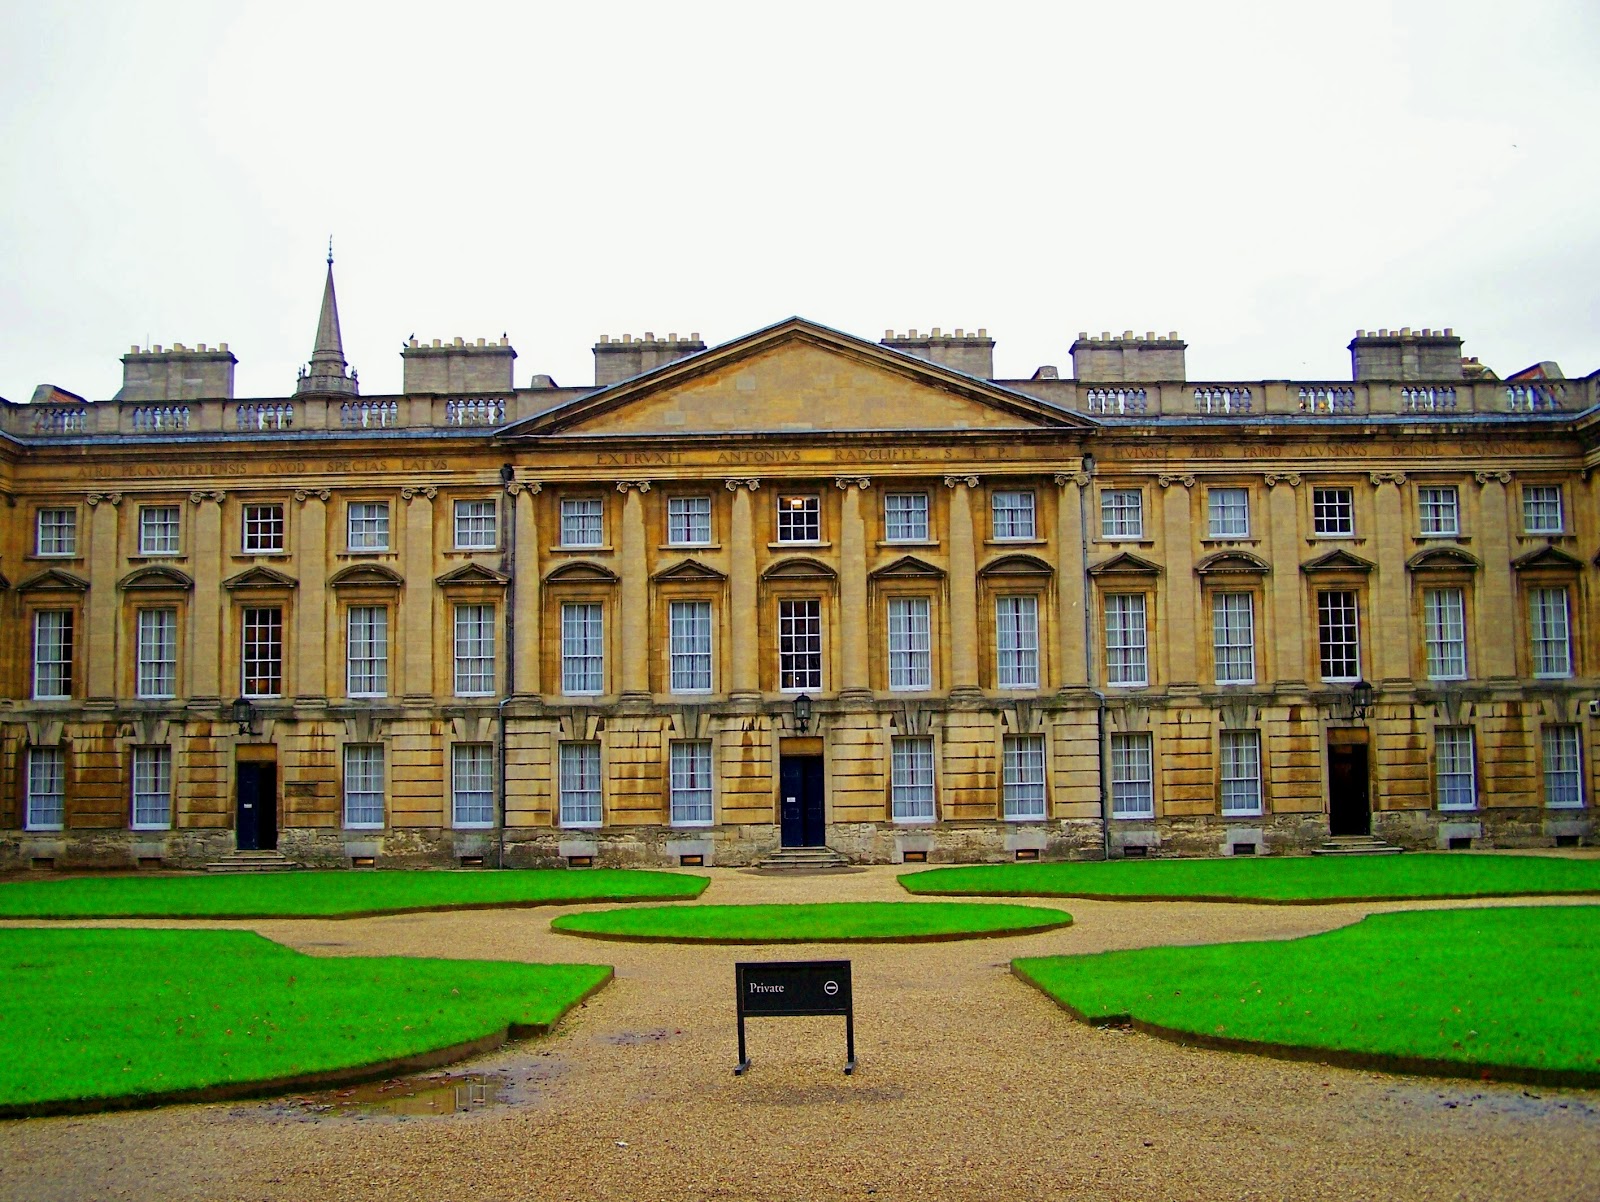 File:Christ Church College Rooms.jpg - Wikimedia Commons